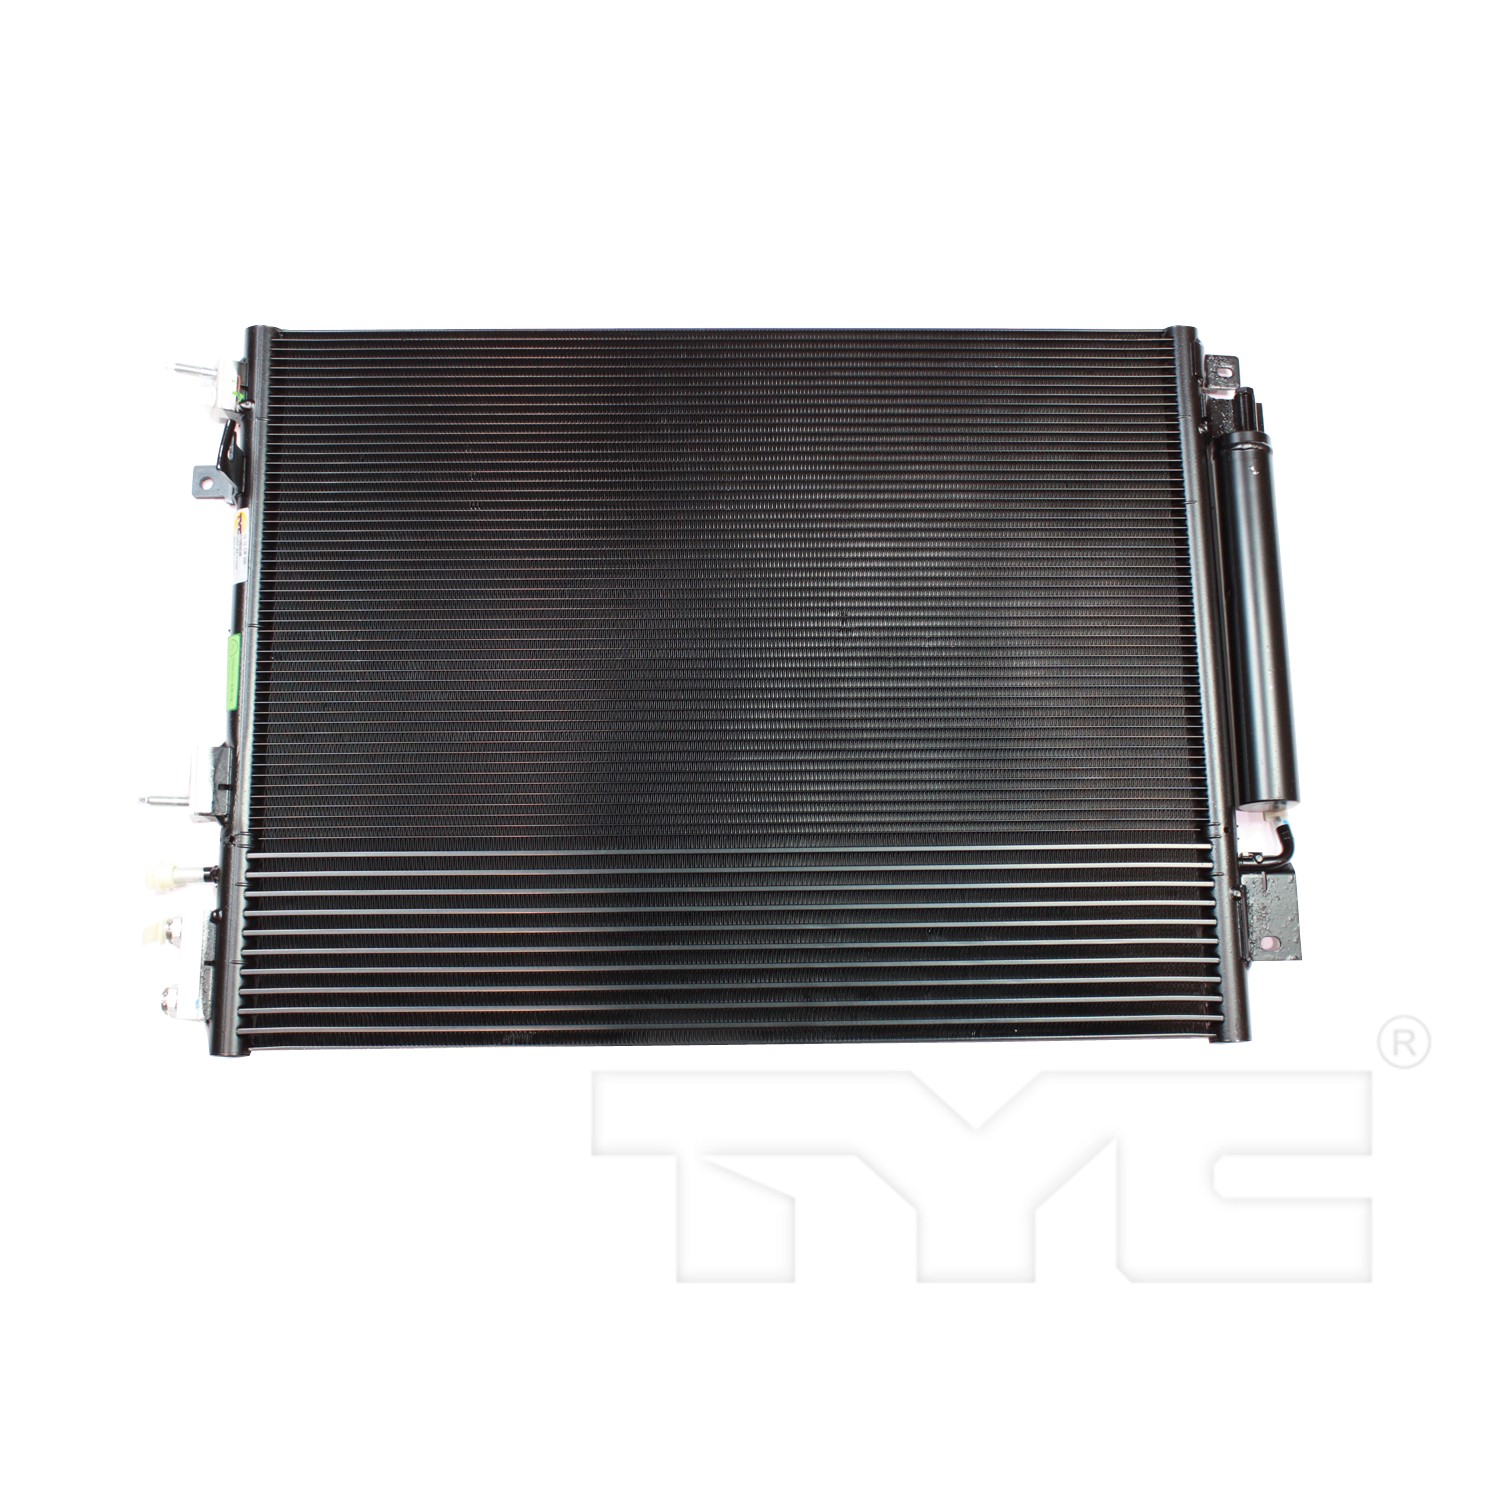 Aftermarket AC CONDENSERS for CHRYSLER - 300, 300,09-10,Air conditioning condenser